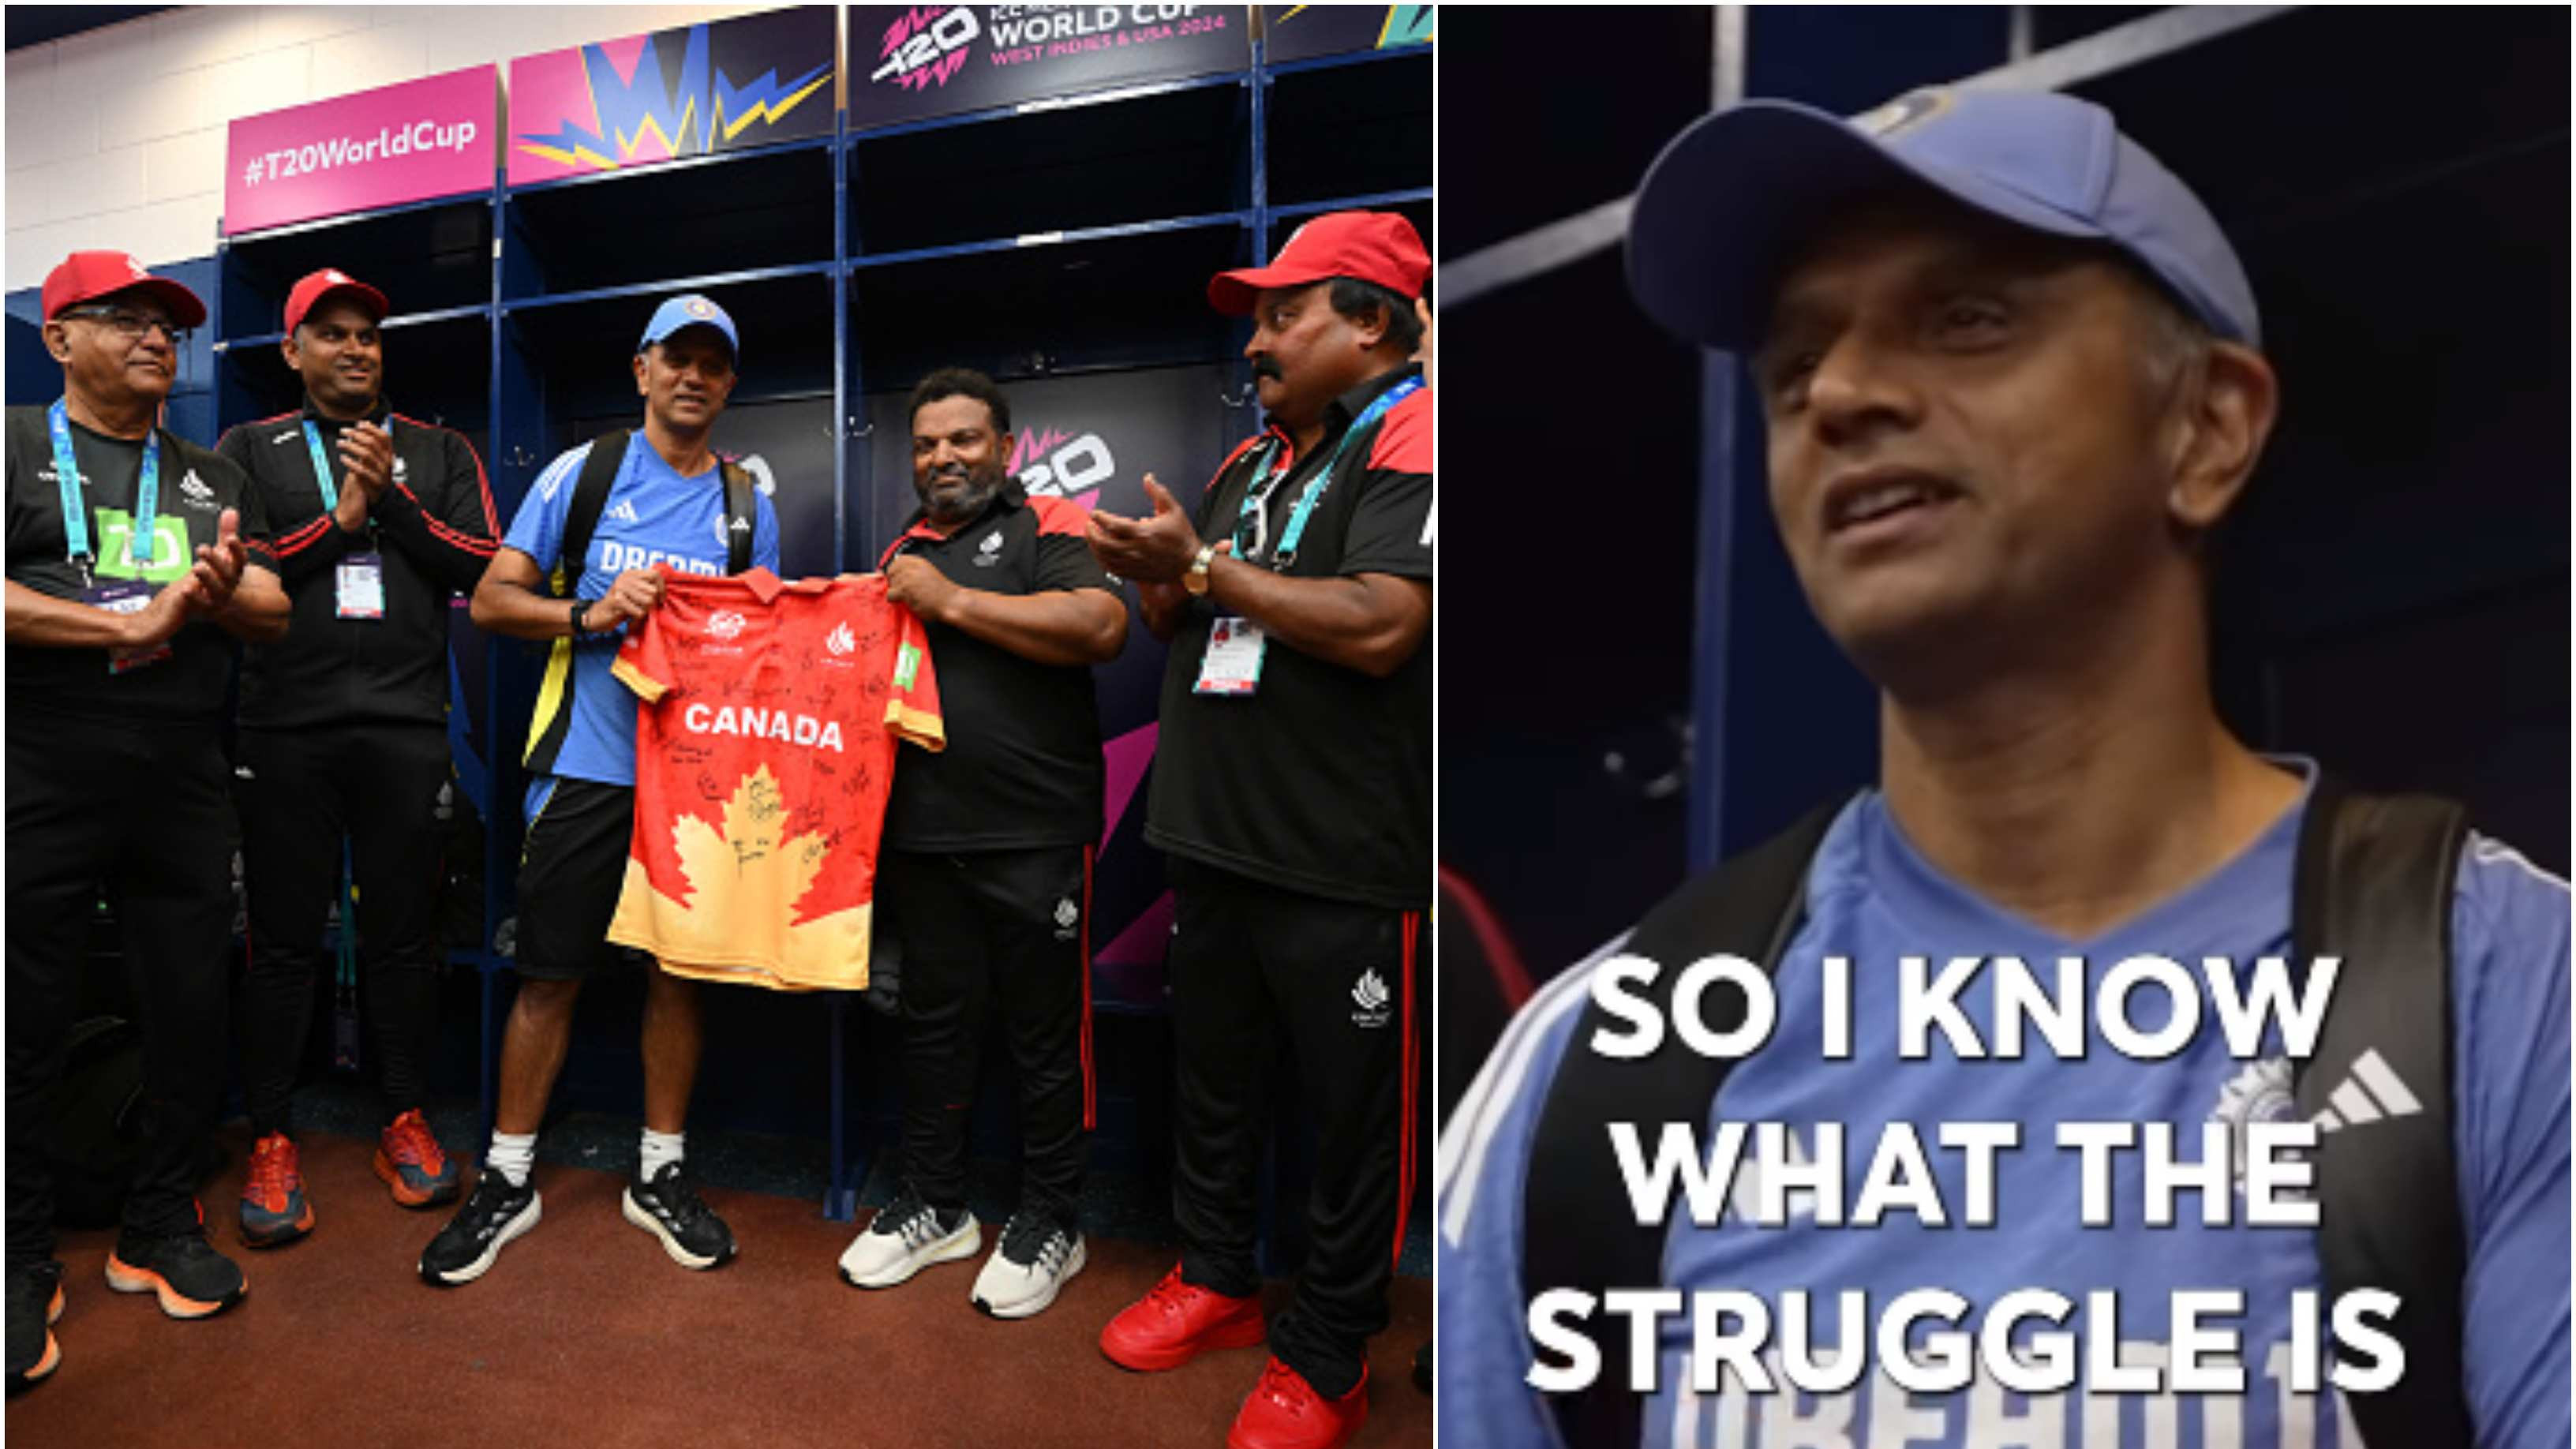 WATCH - “You guys are an inspiration, keep taking it forward”: Rahul Dravid's heartfelt message to Canada players